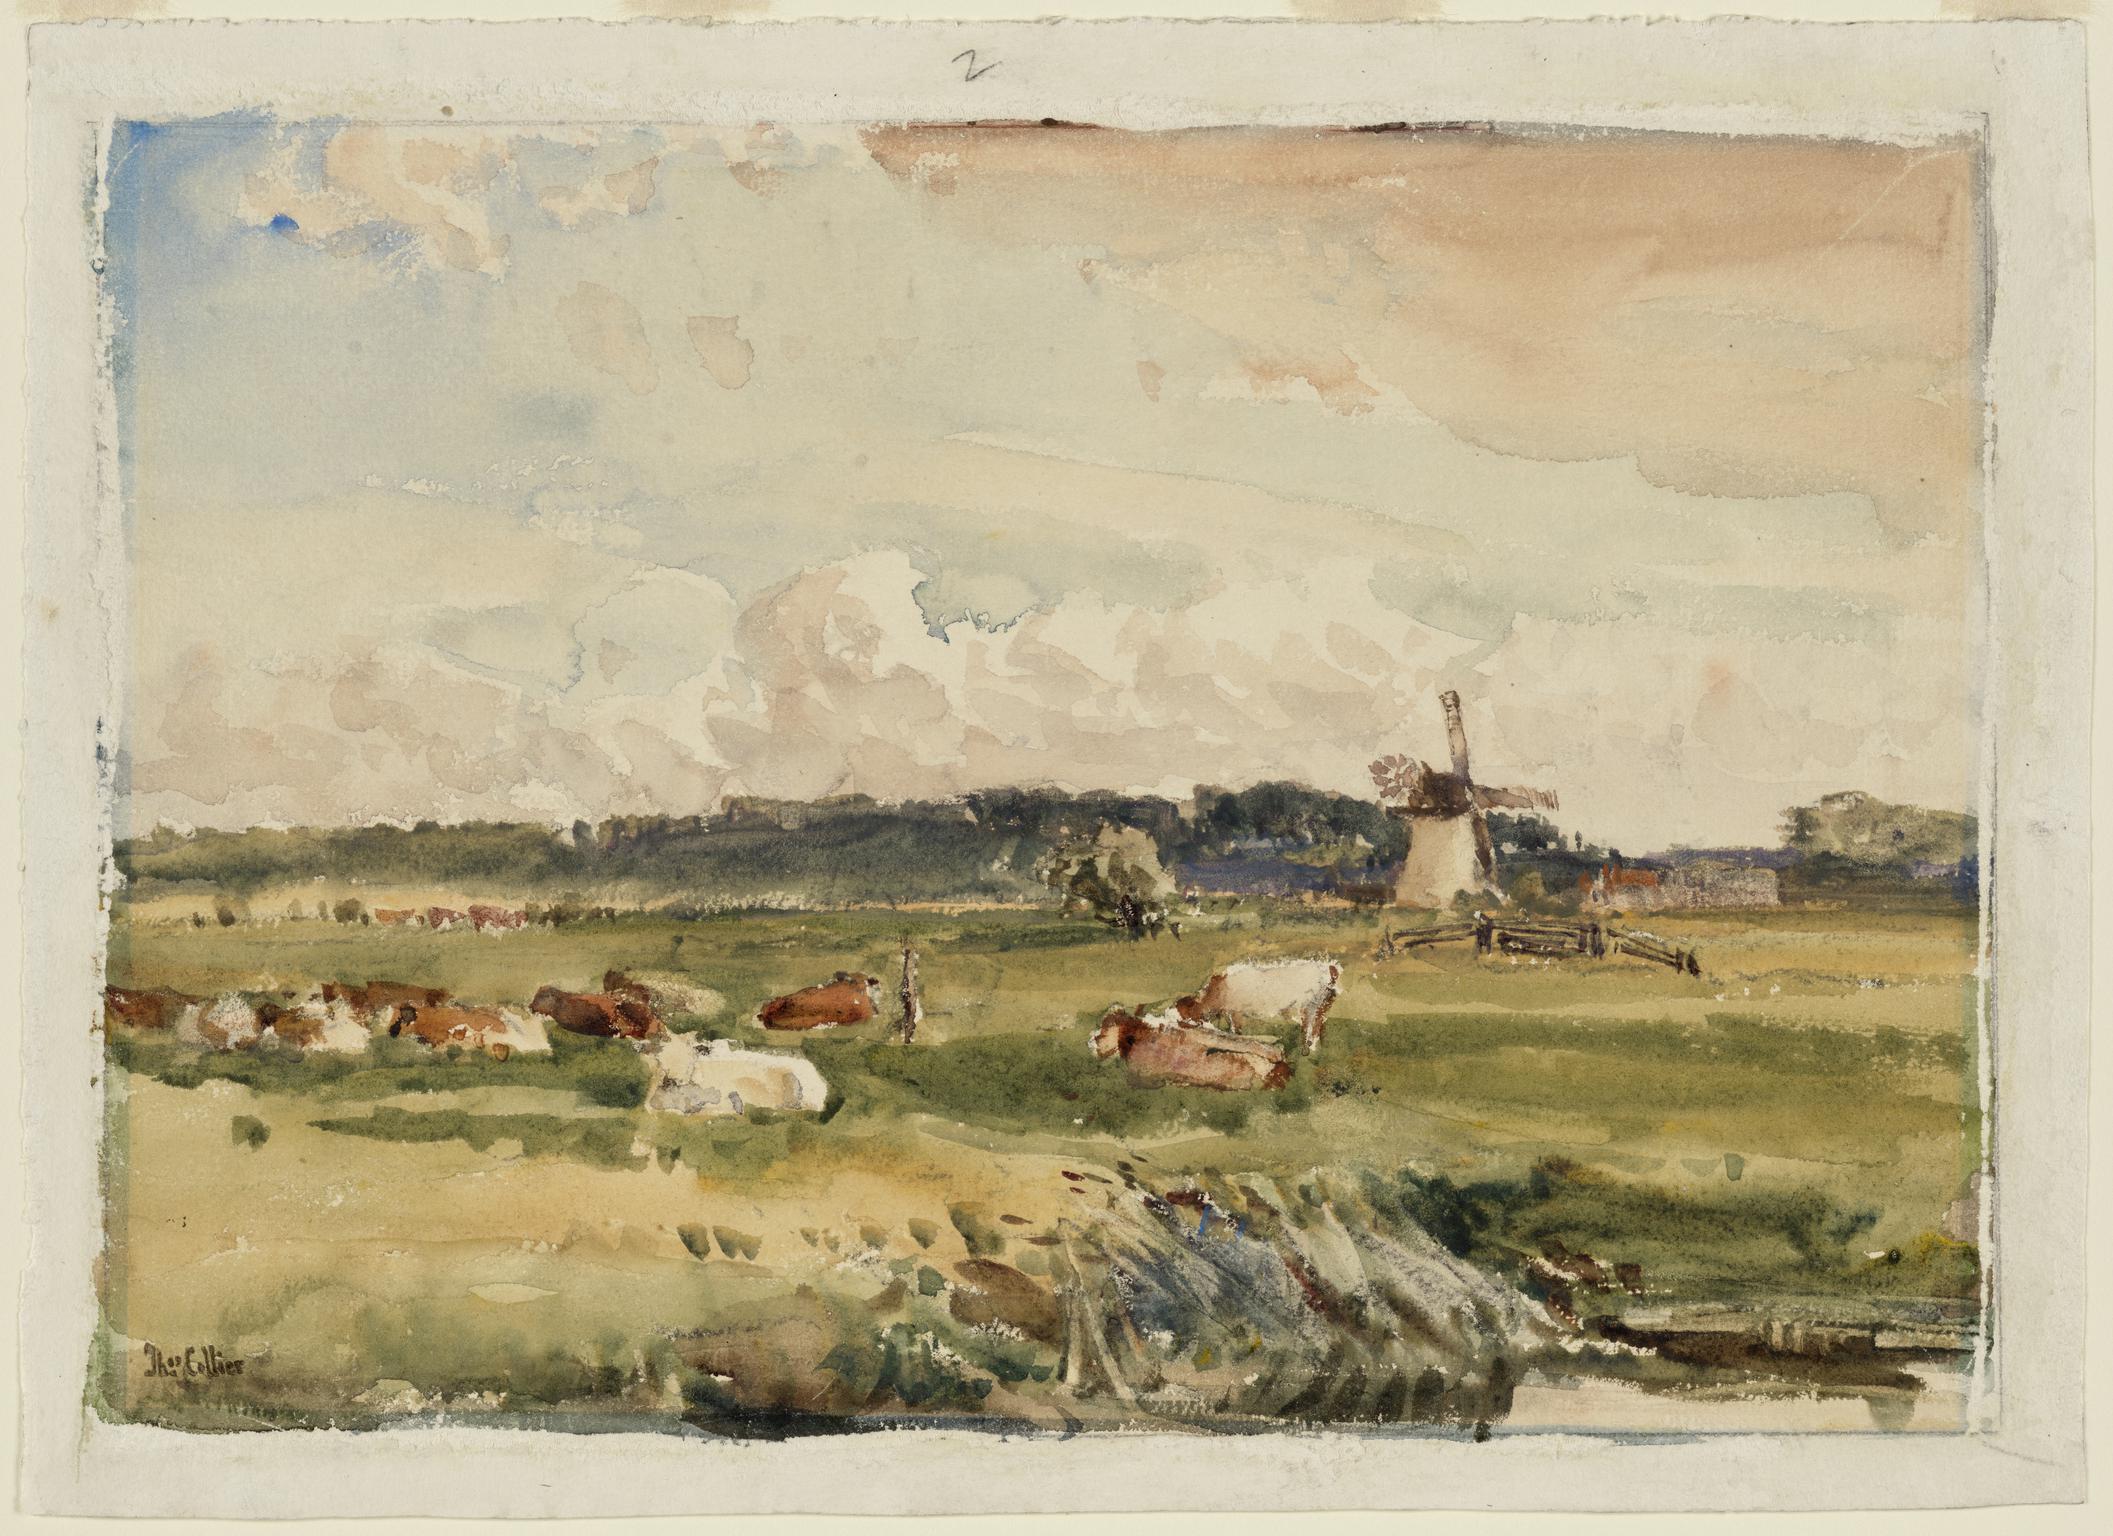 Landscape with windmill